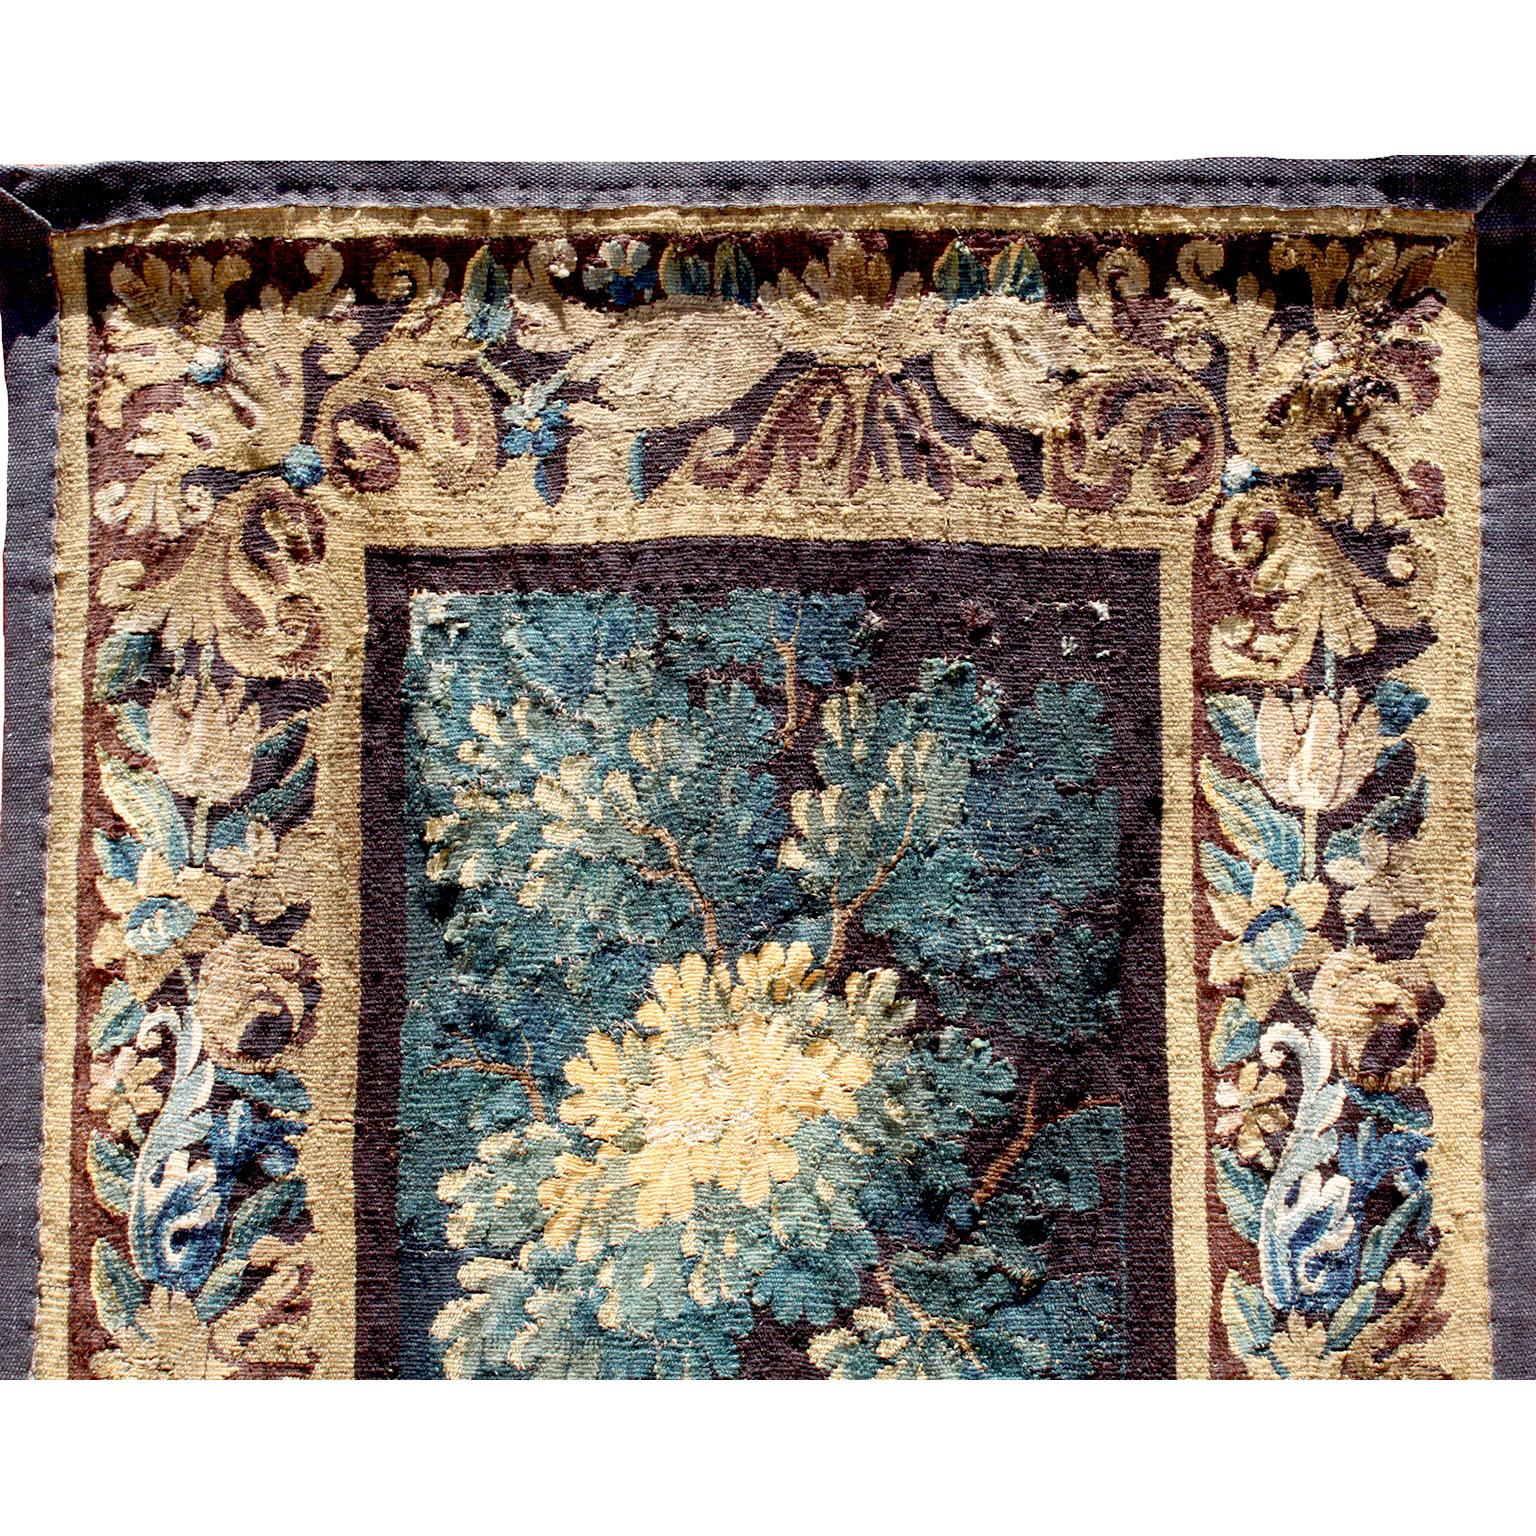 A fine flemish 18th-19th century Verdure landscape tapestry, the wool and silk tapestry centered by a scene of a tall tree within a forest background and a foliage border. Circa: 1800.

Measures: Height: 100 1/4 inches (254.6 cm)
Width: 37 1/4